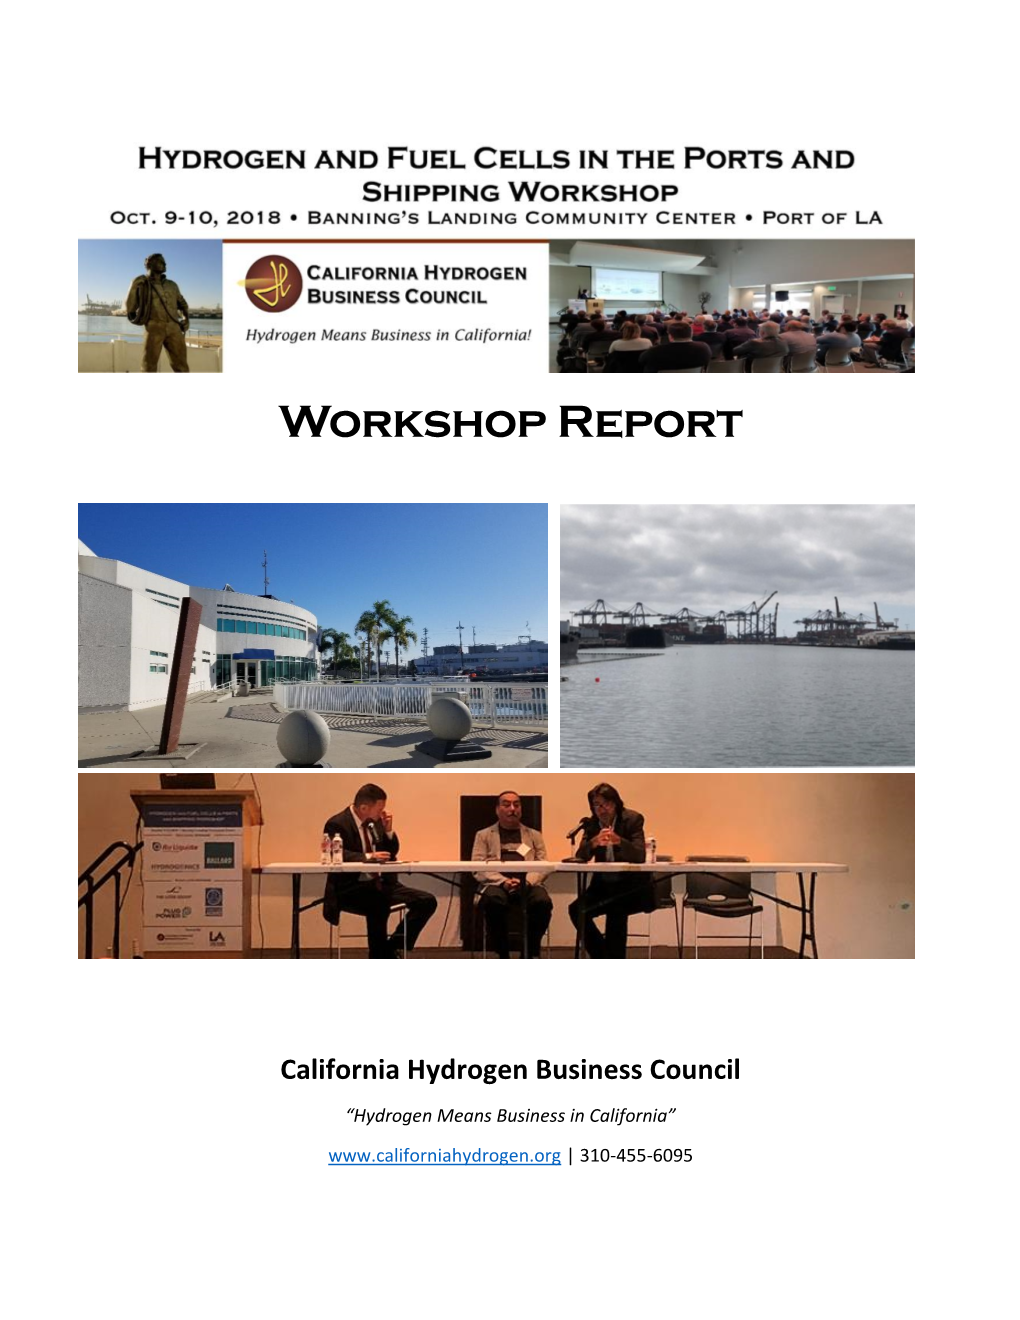 2018 CHBC Hydrogen and Fuel Cells in Ports and Shipping Workshop